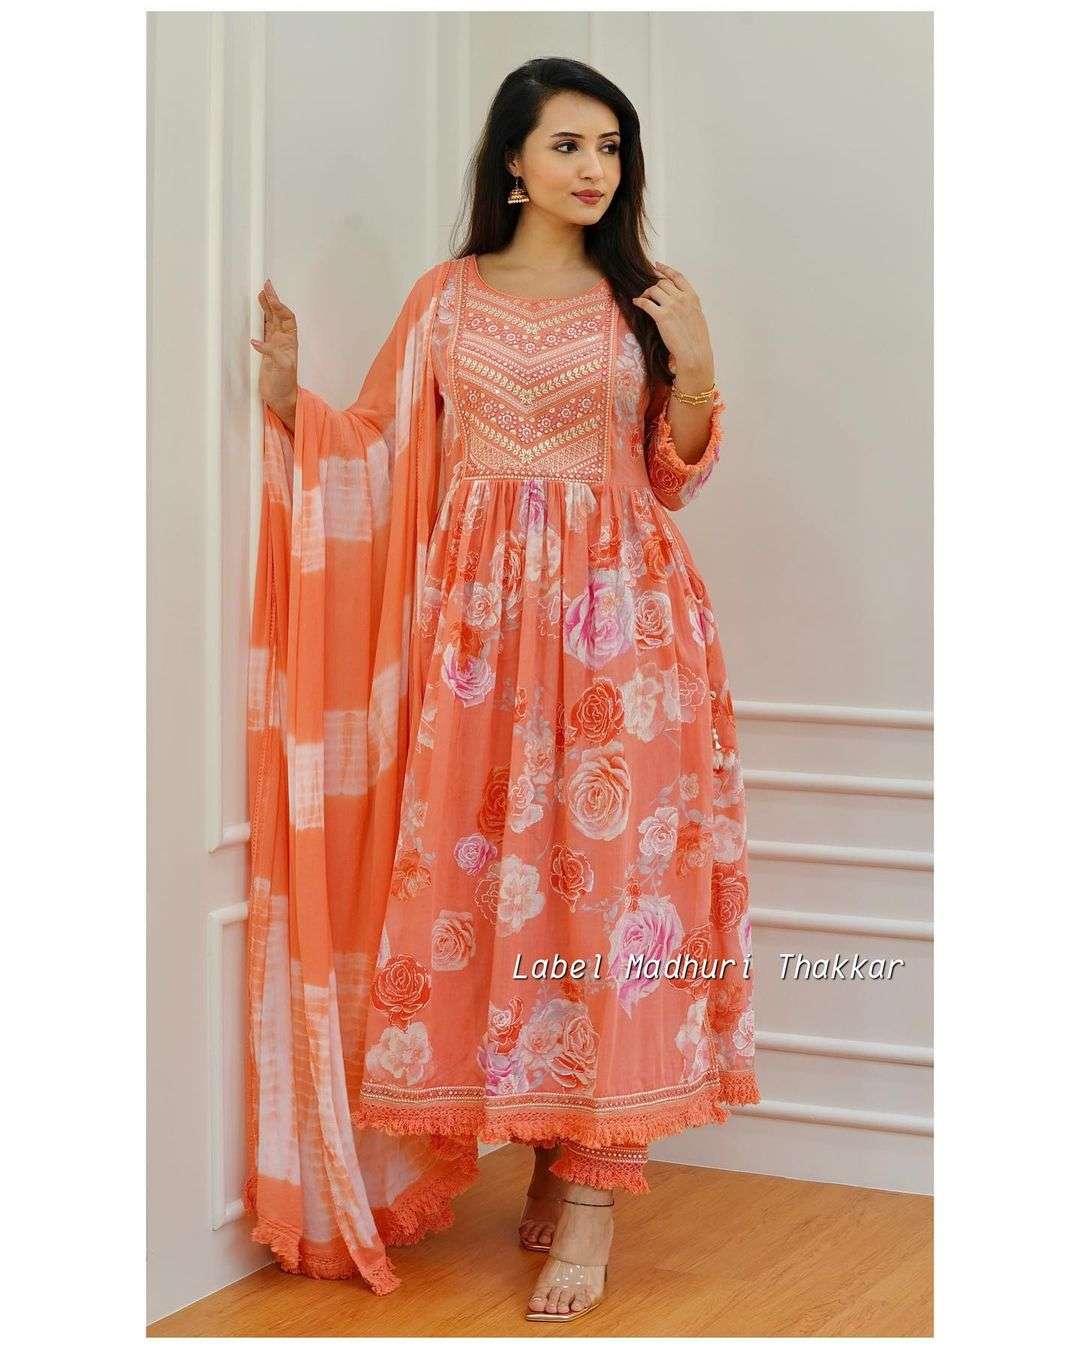 orange and yellow floral embroidered nyra cut cotton suit sets with embroidery and motifs it is paired with matching pants and chiffon tie dye dupatta